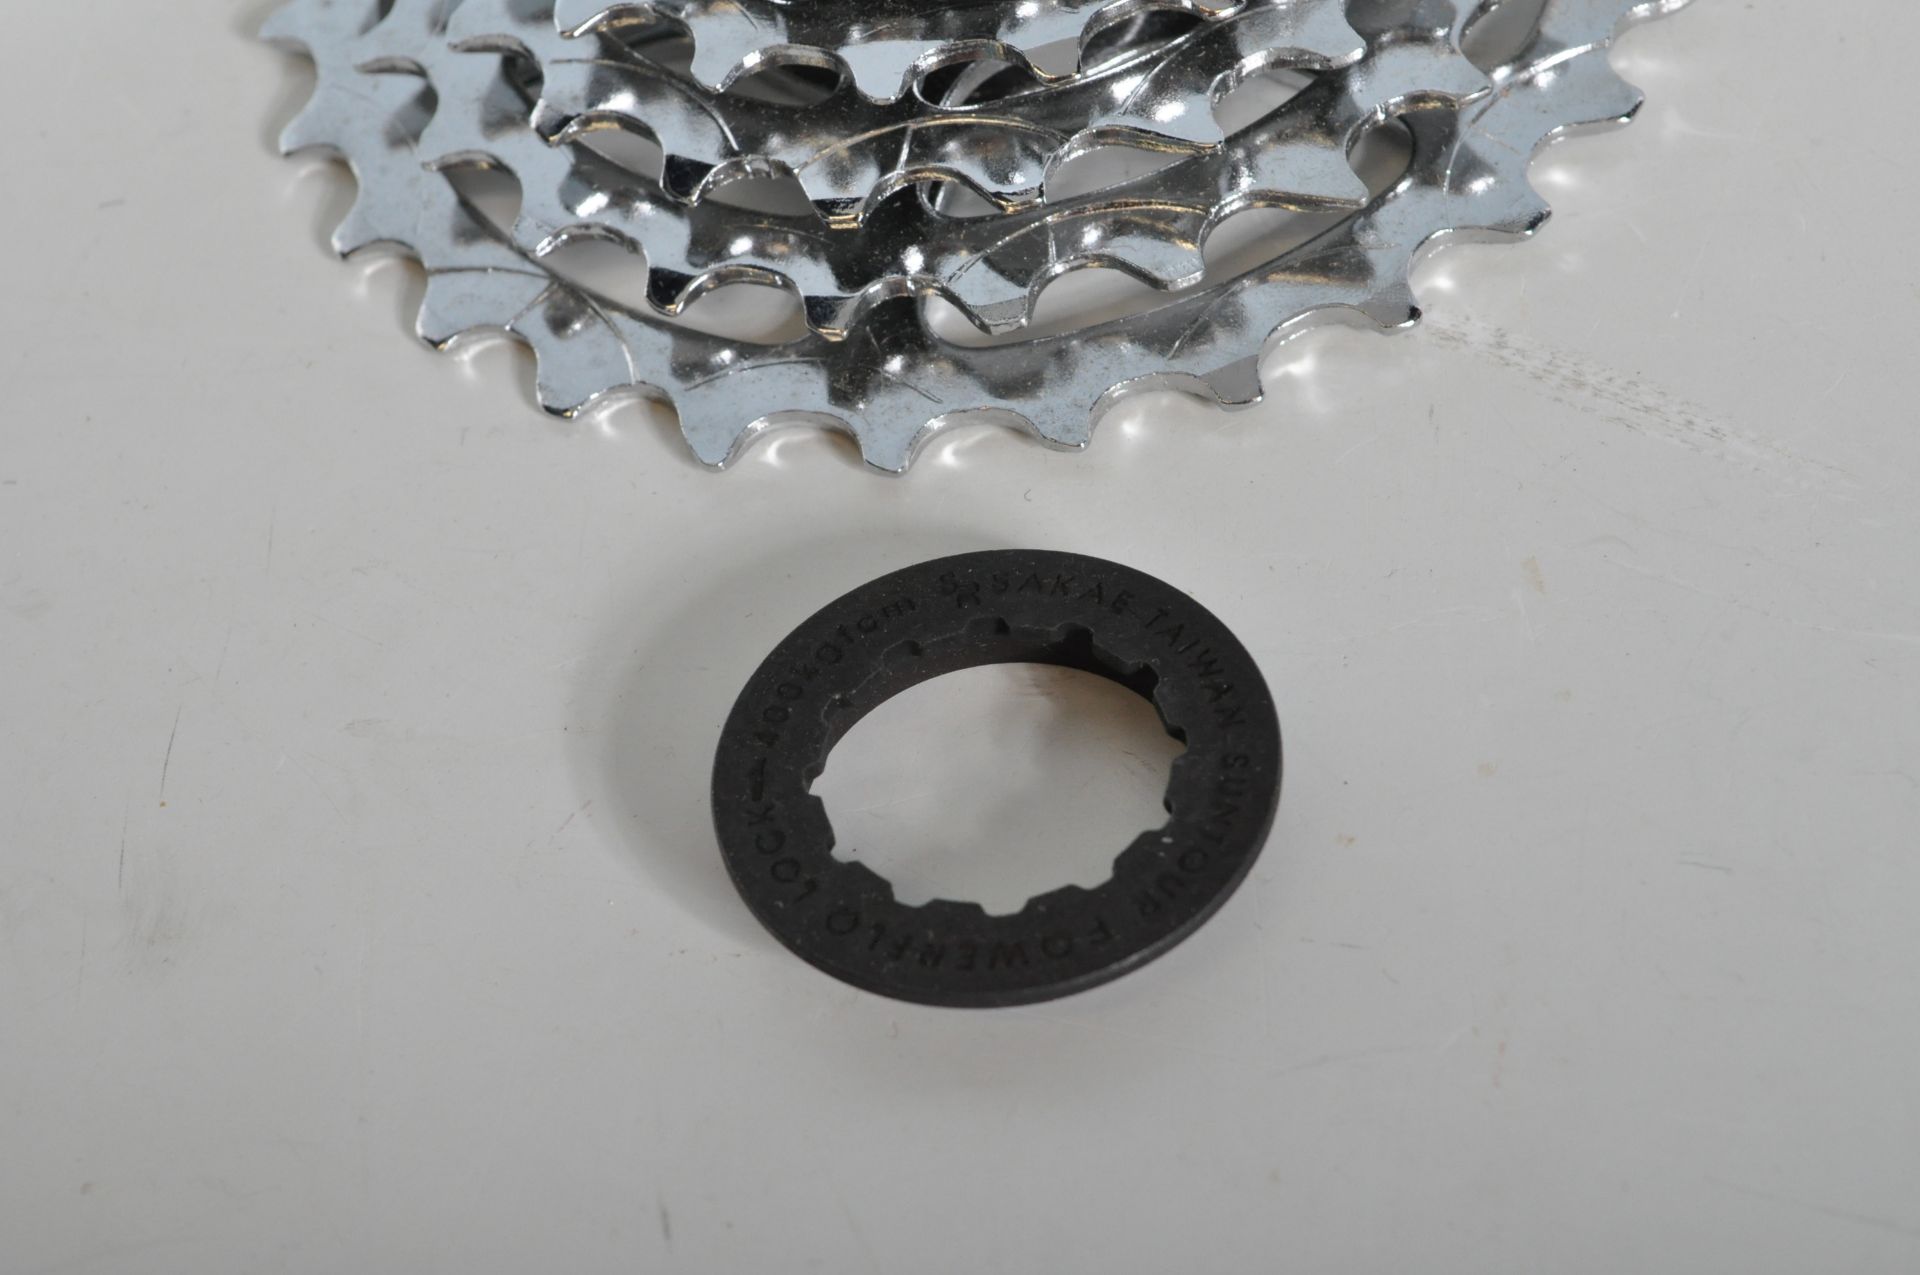 VINTAGE BICYCLES AND SPARES - SET OF NOS RACING BIKE GEARS - Image 7 of 9